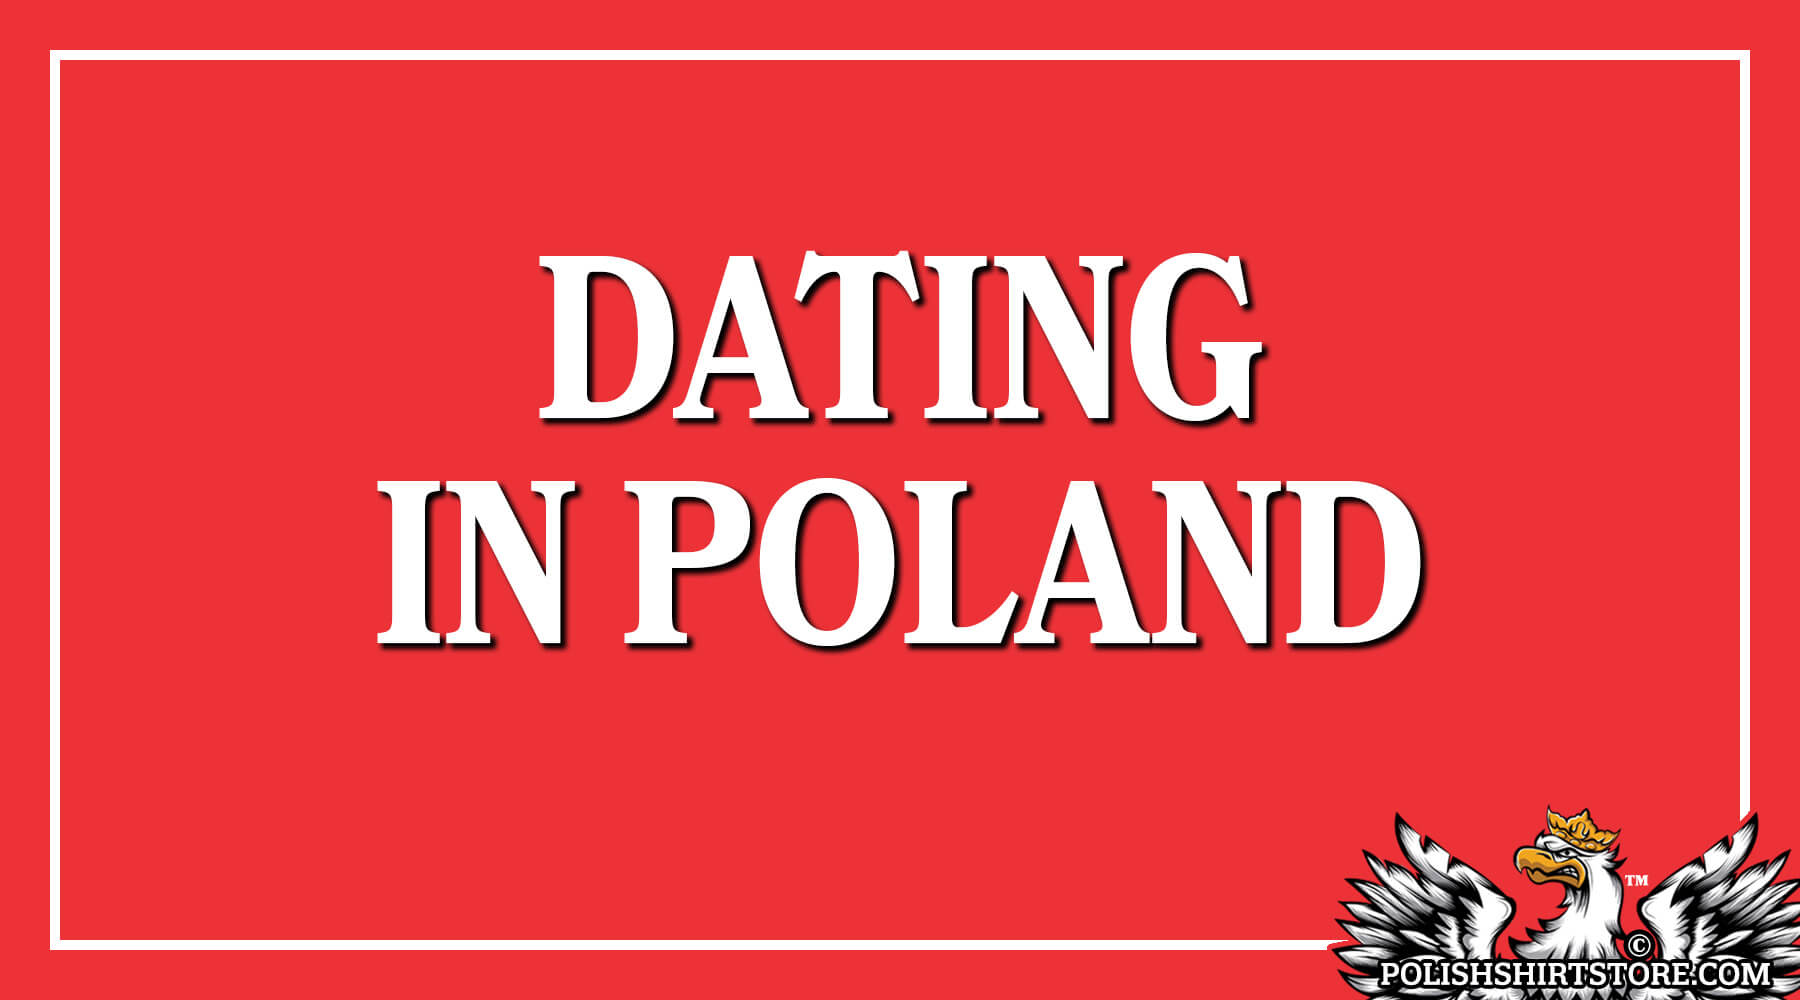 Dating in Poland